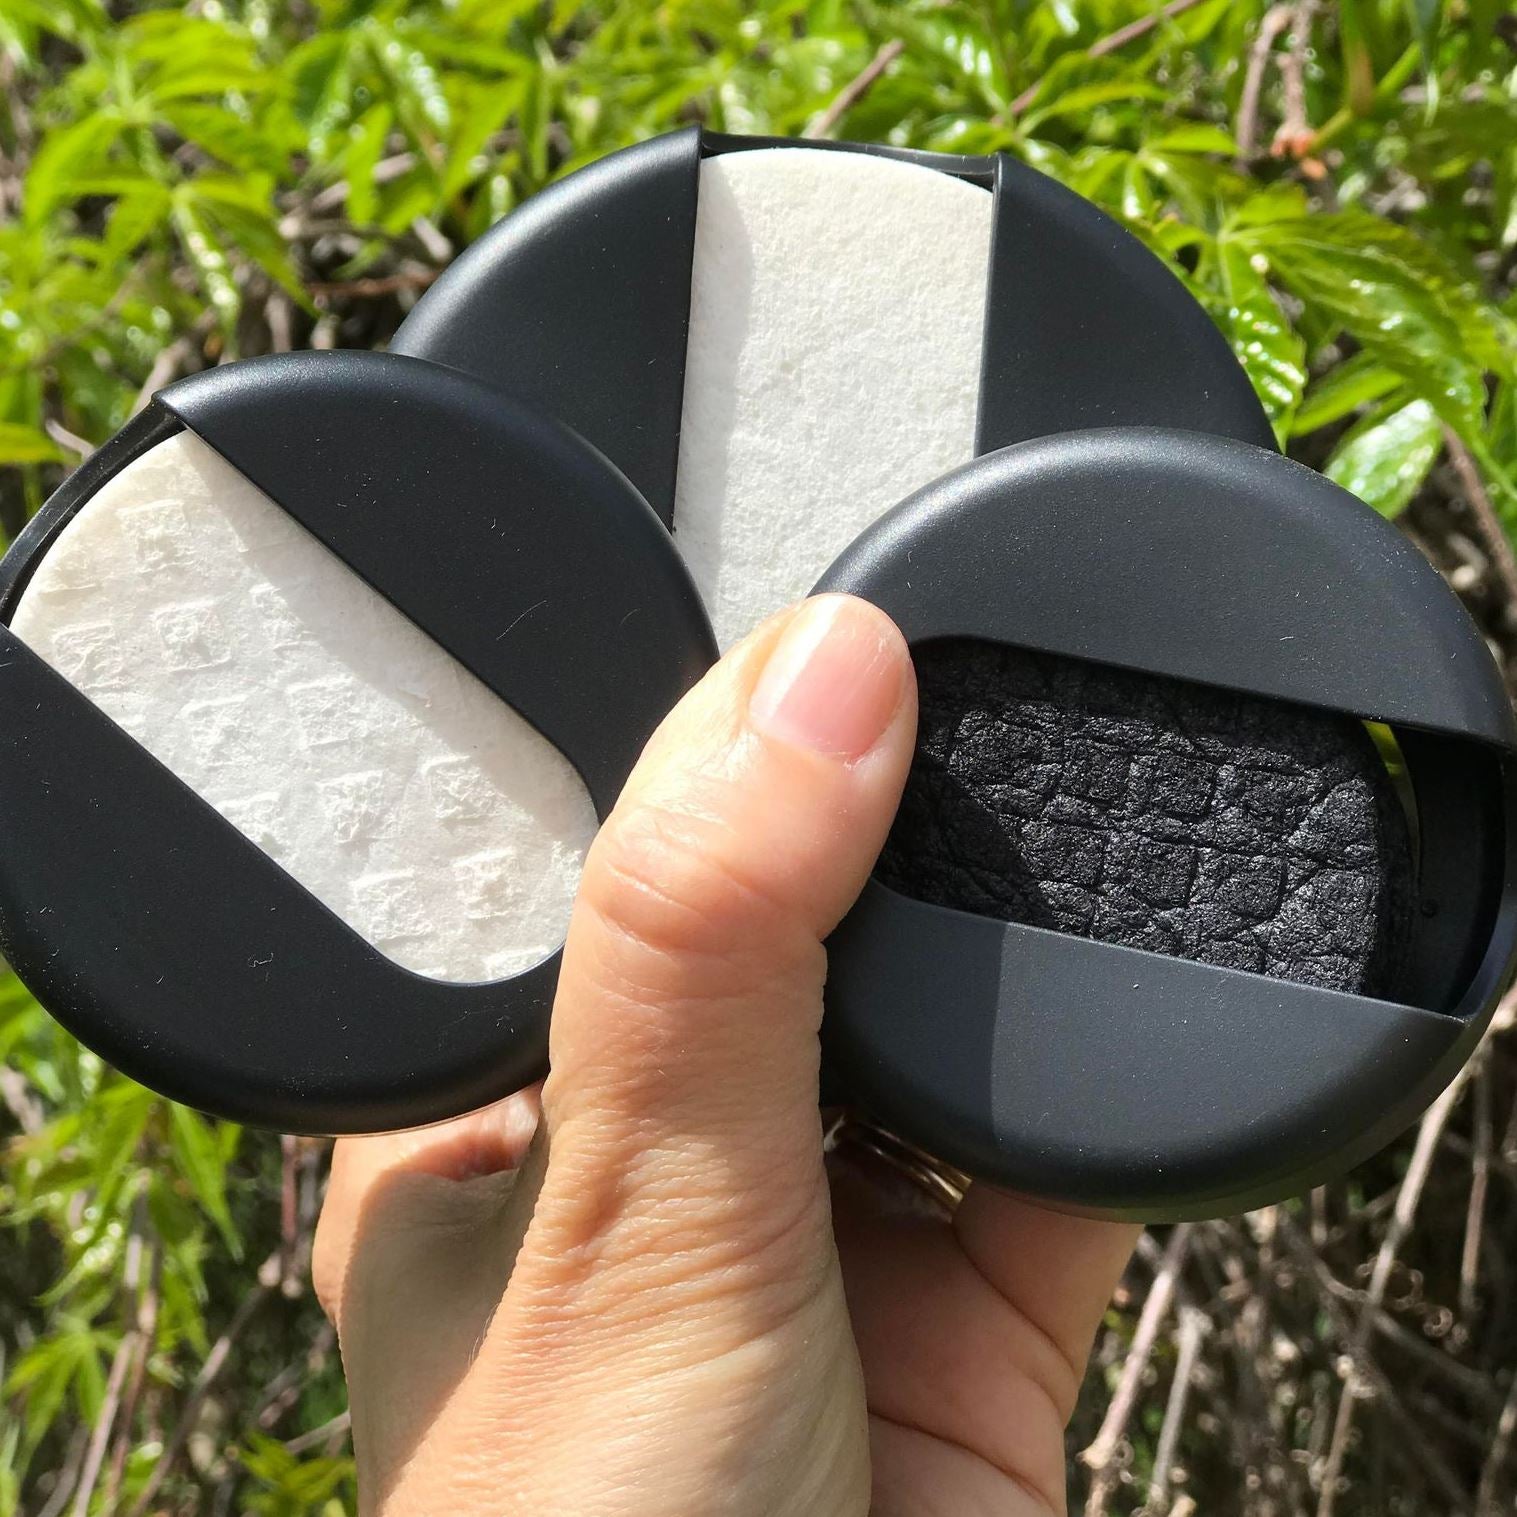 LastRound reusable makeup remover pads are available in white (regular) and white (large) as well as in a black pro (regular) version, sold separately.